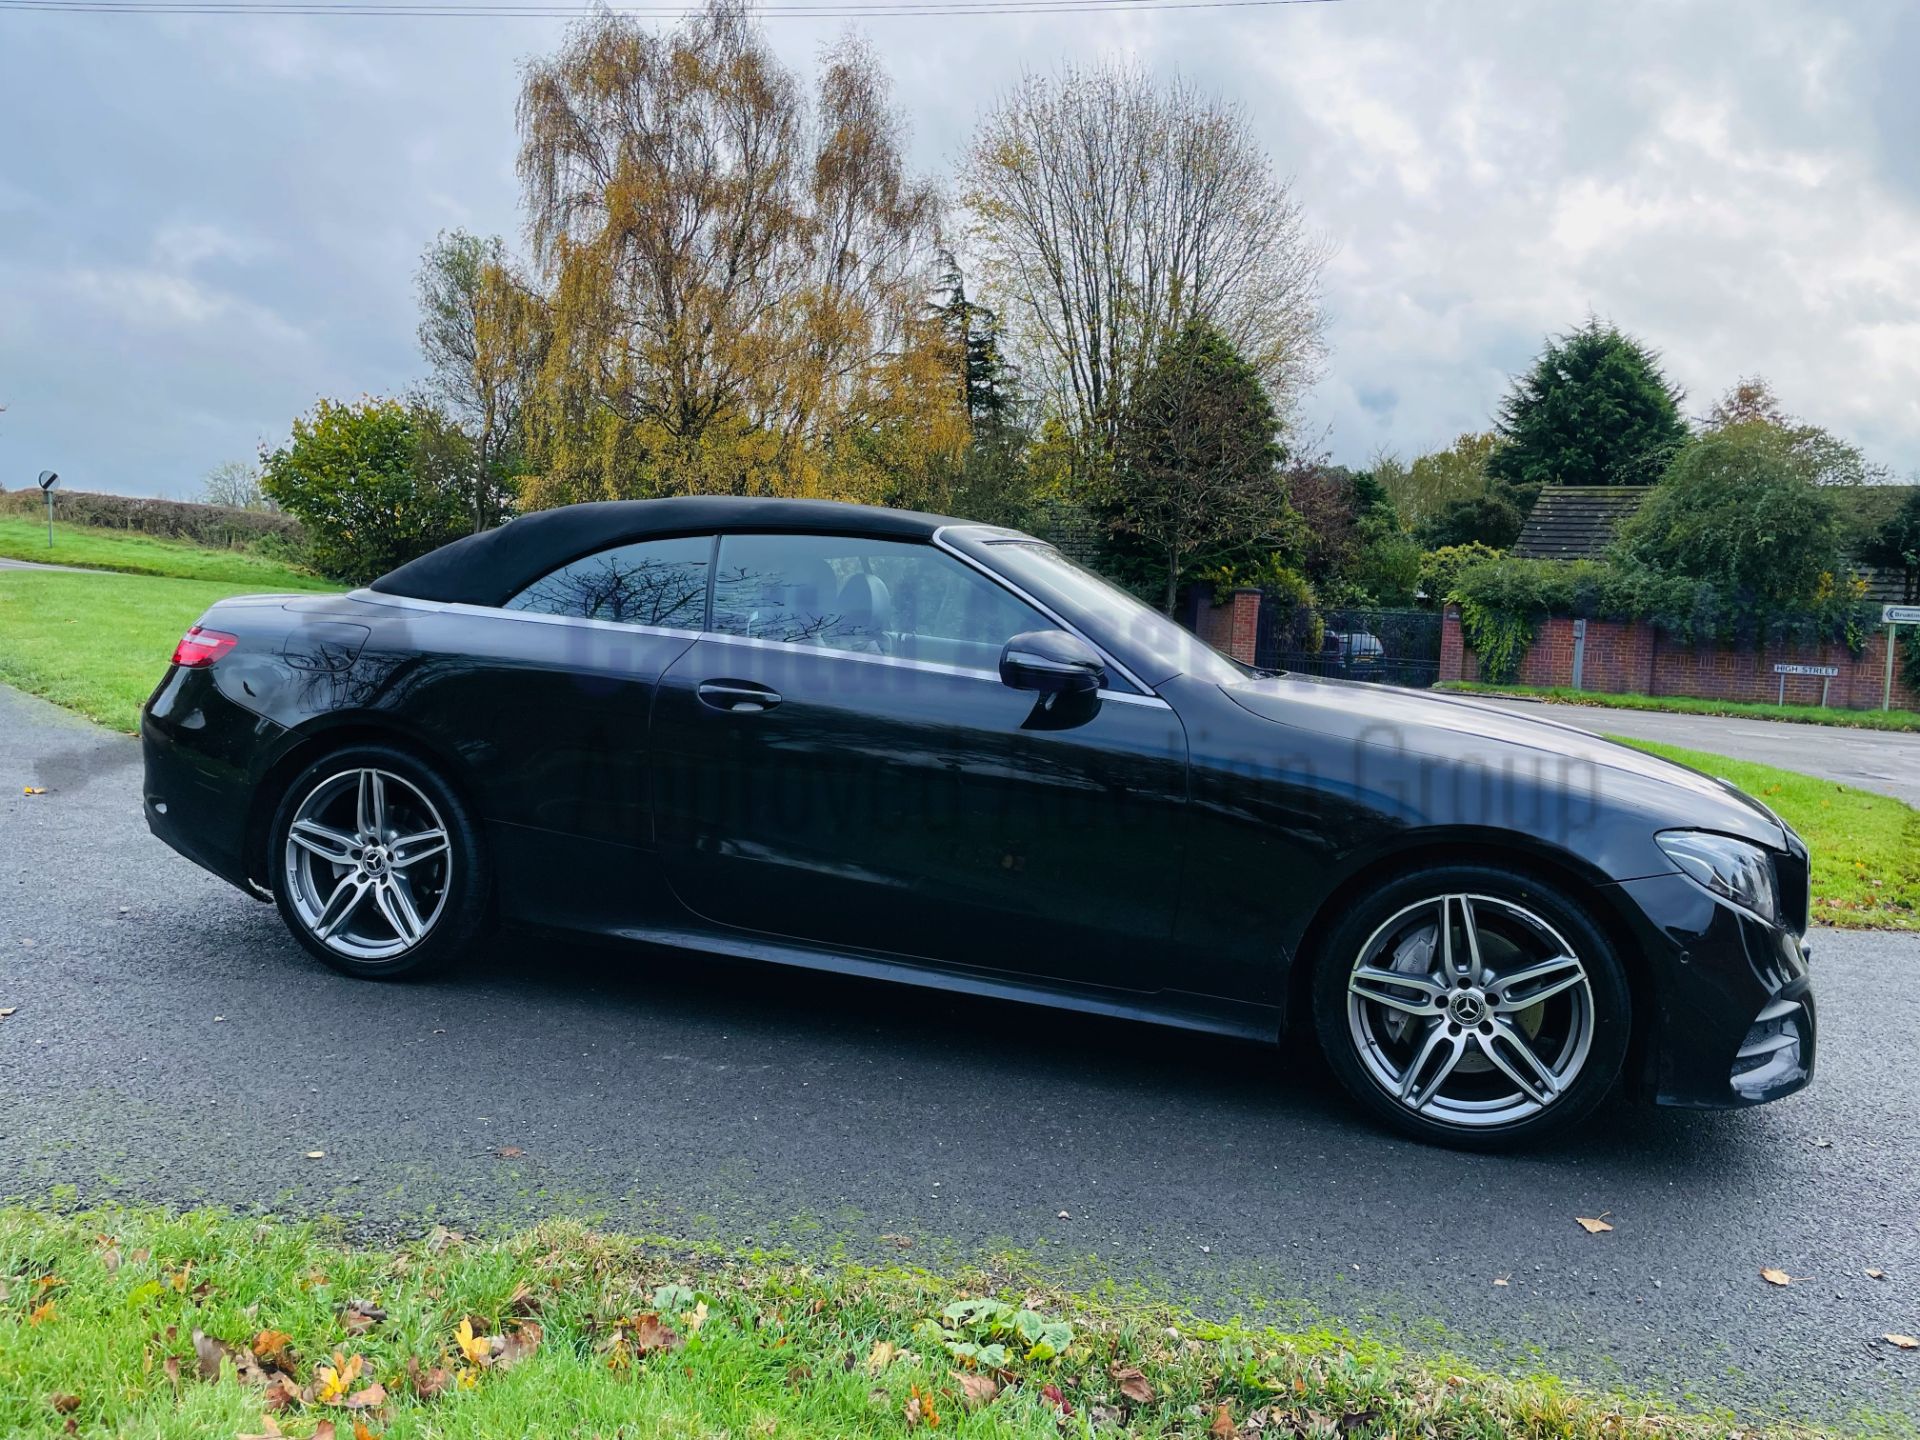 MERCEDES-BENZ E220d *AMG LINE - CABRIOLET* (2019 - EURO 6) '9G TRONIC AUTO - SAT NAV' *FULLY LOADED* - Image 28 of 66